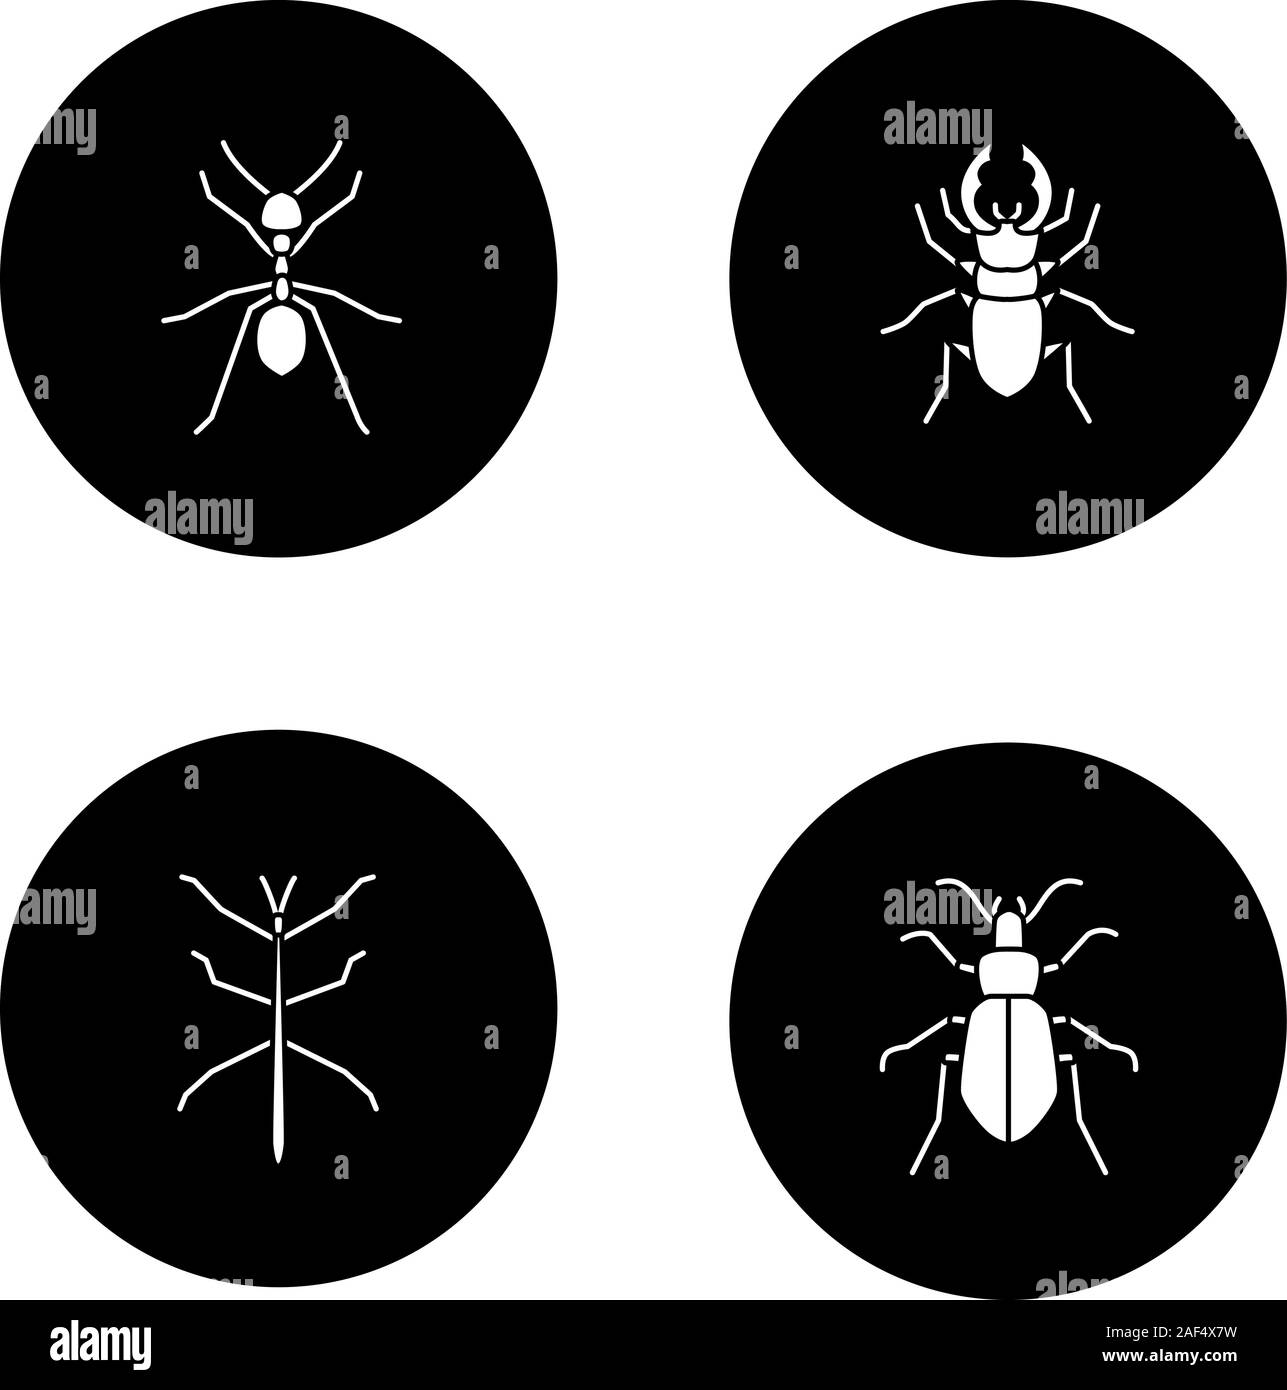 Insects glyph icons set. Ant, stag beetle, ground bug, phasmid. Vector white silhouettes illustrations in black circles Stock Vector